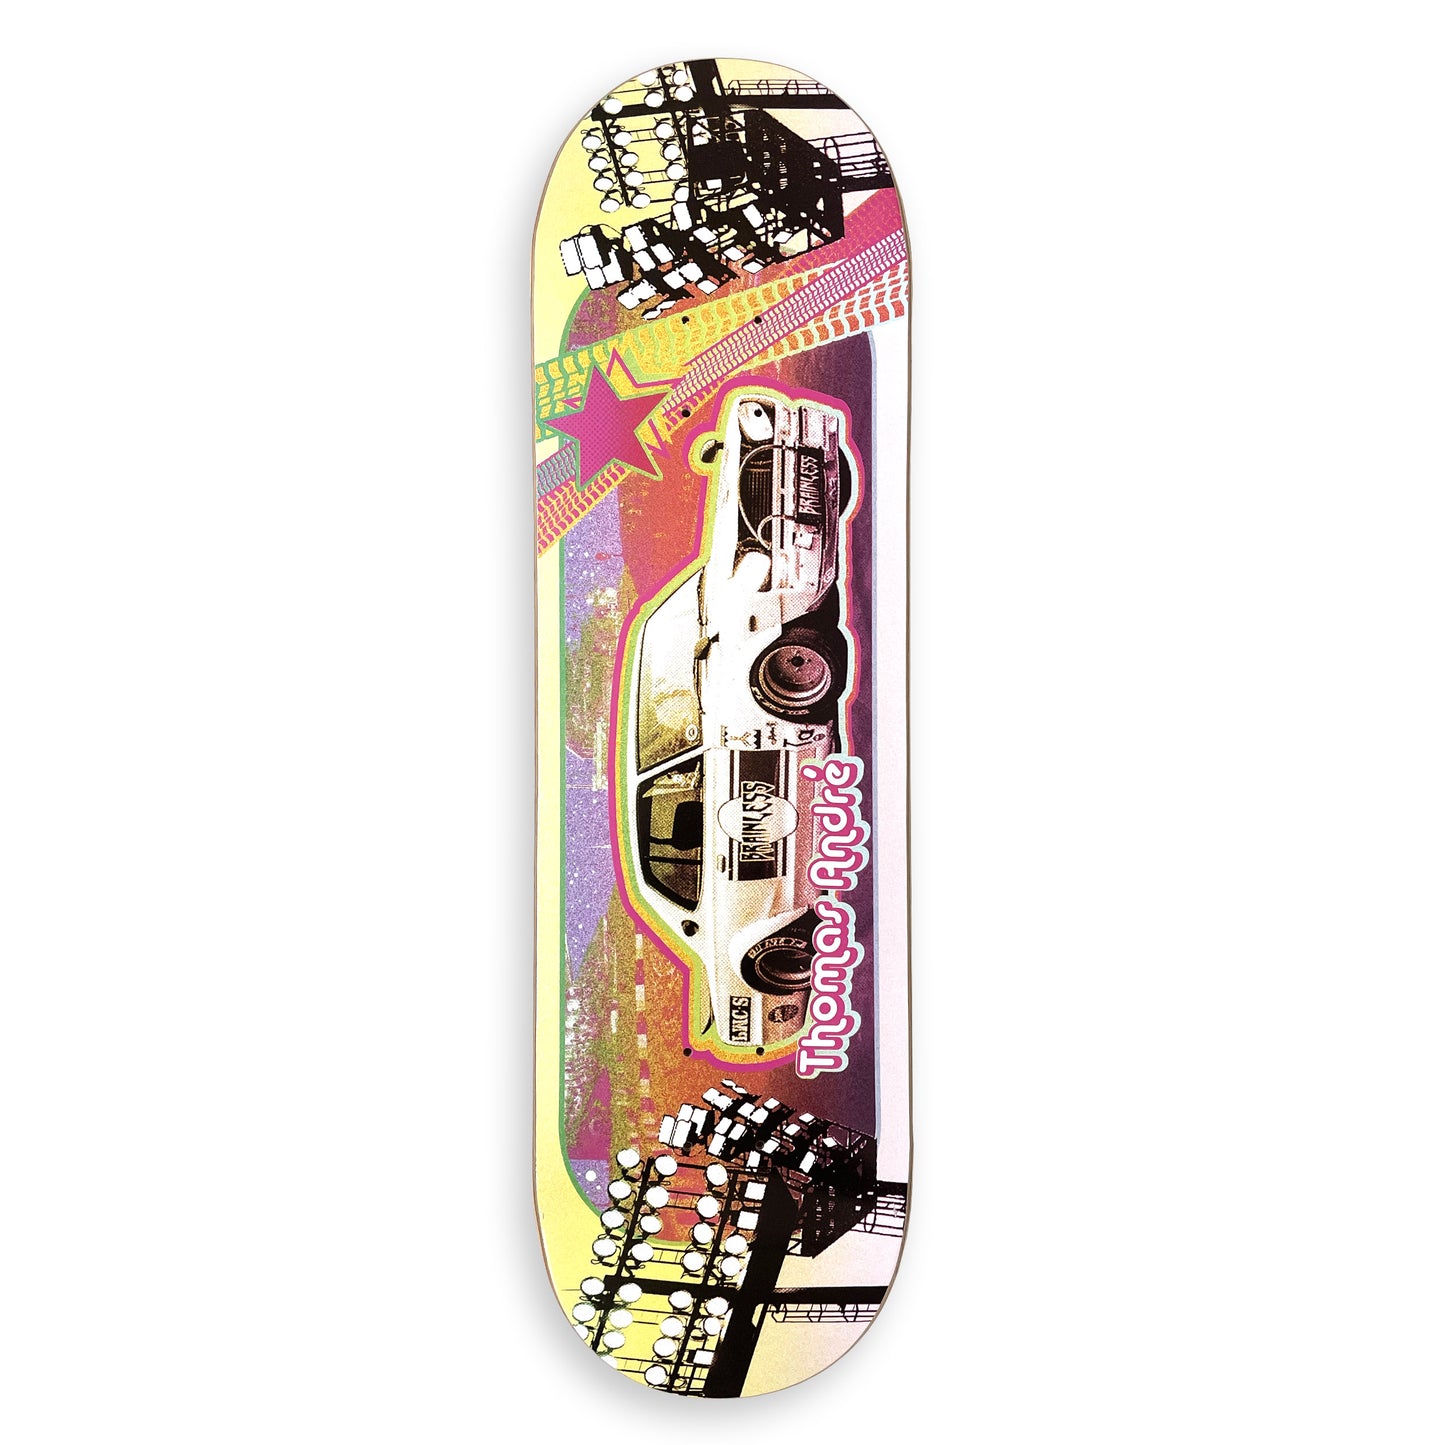 Brainless skateboards King of the Road Thomas André 8.625"